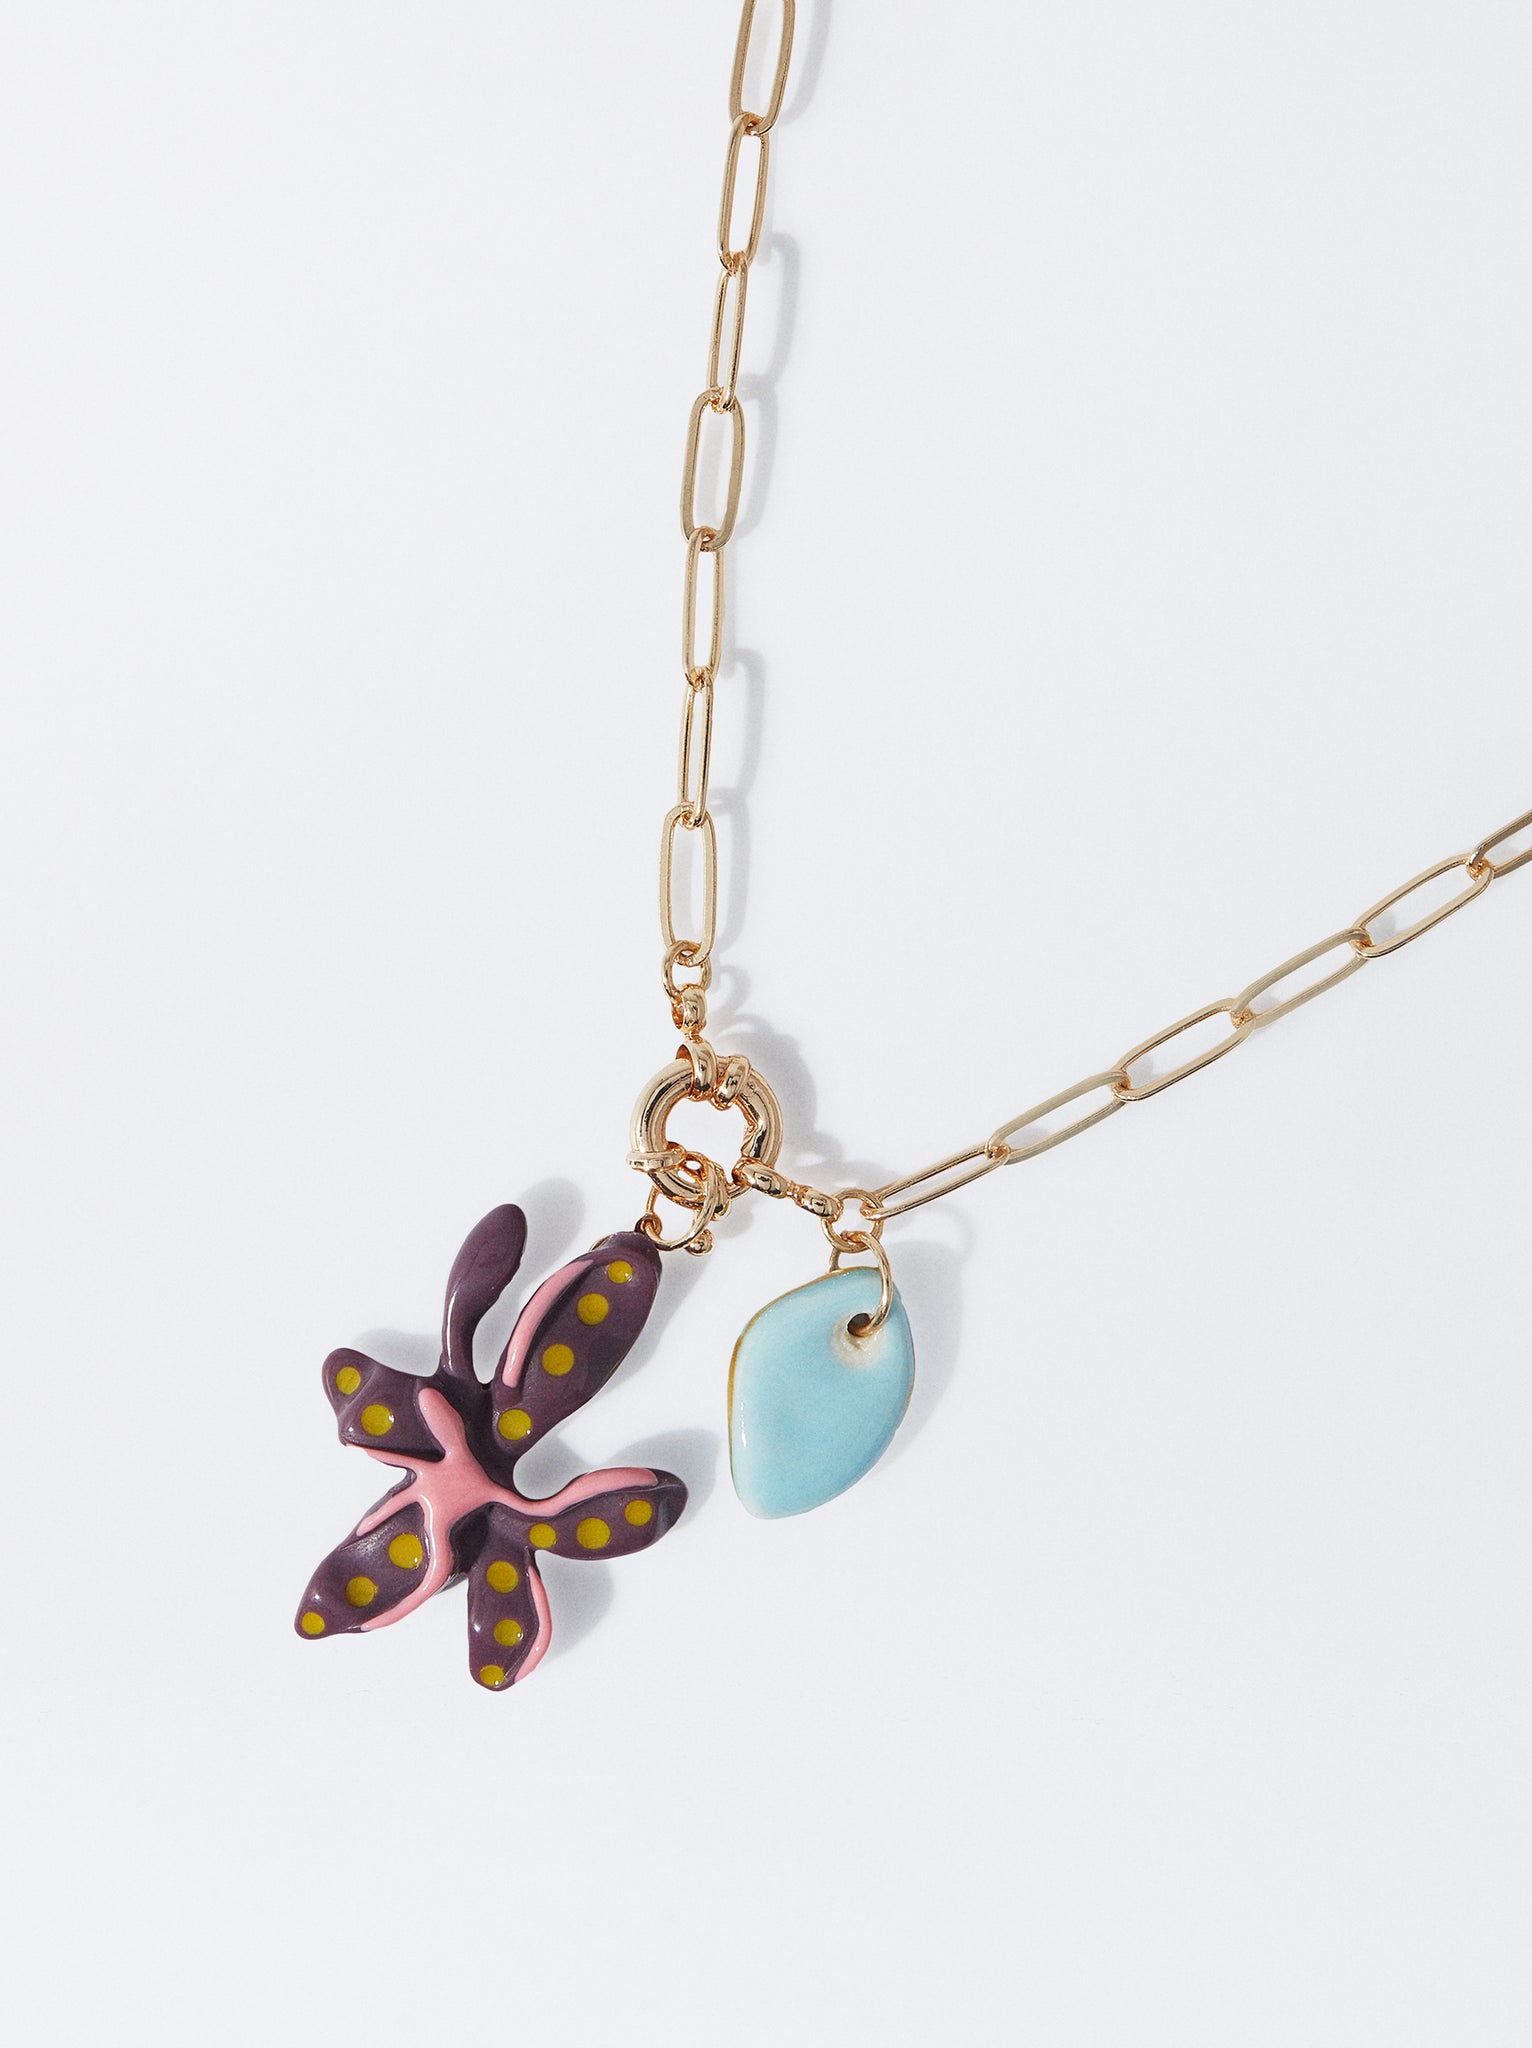 Flower And Ceramic Necklace